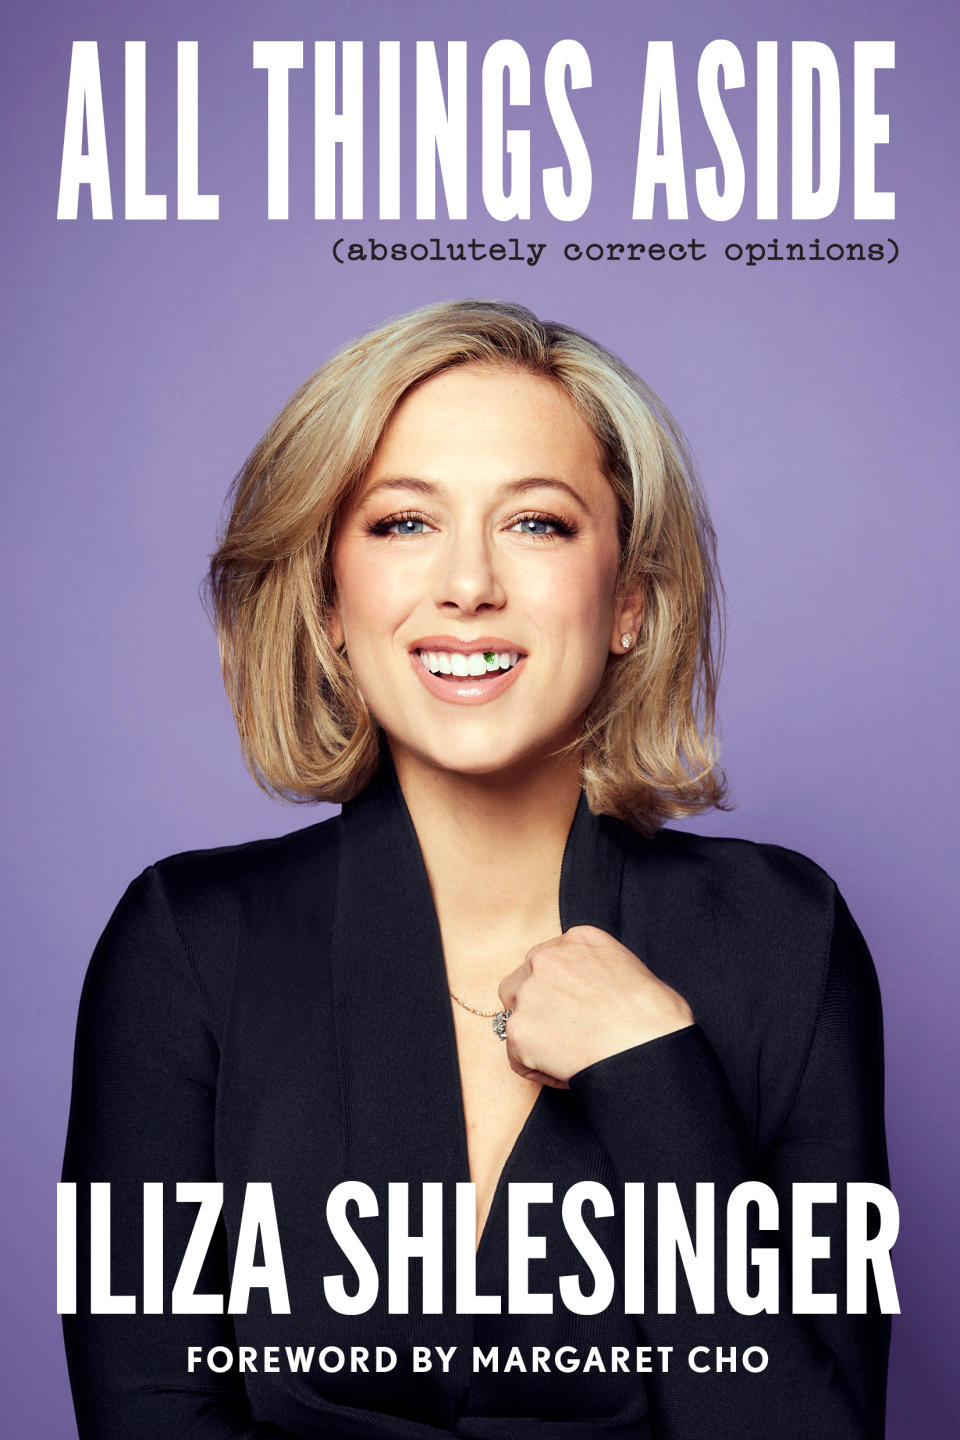 ALL THINGS ASIDE: ABSOLUTELY CORRECT OPINIONS by Iliza Shlesinger, Foreword by Margaret Cho